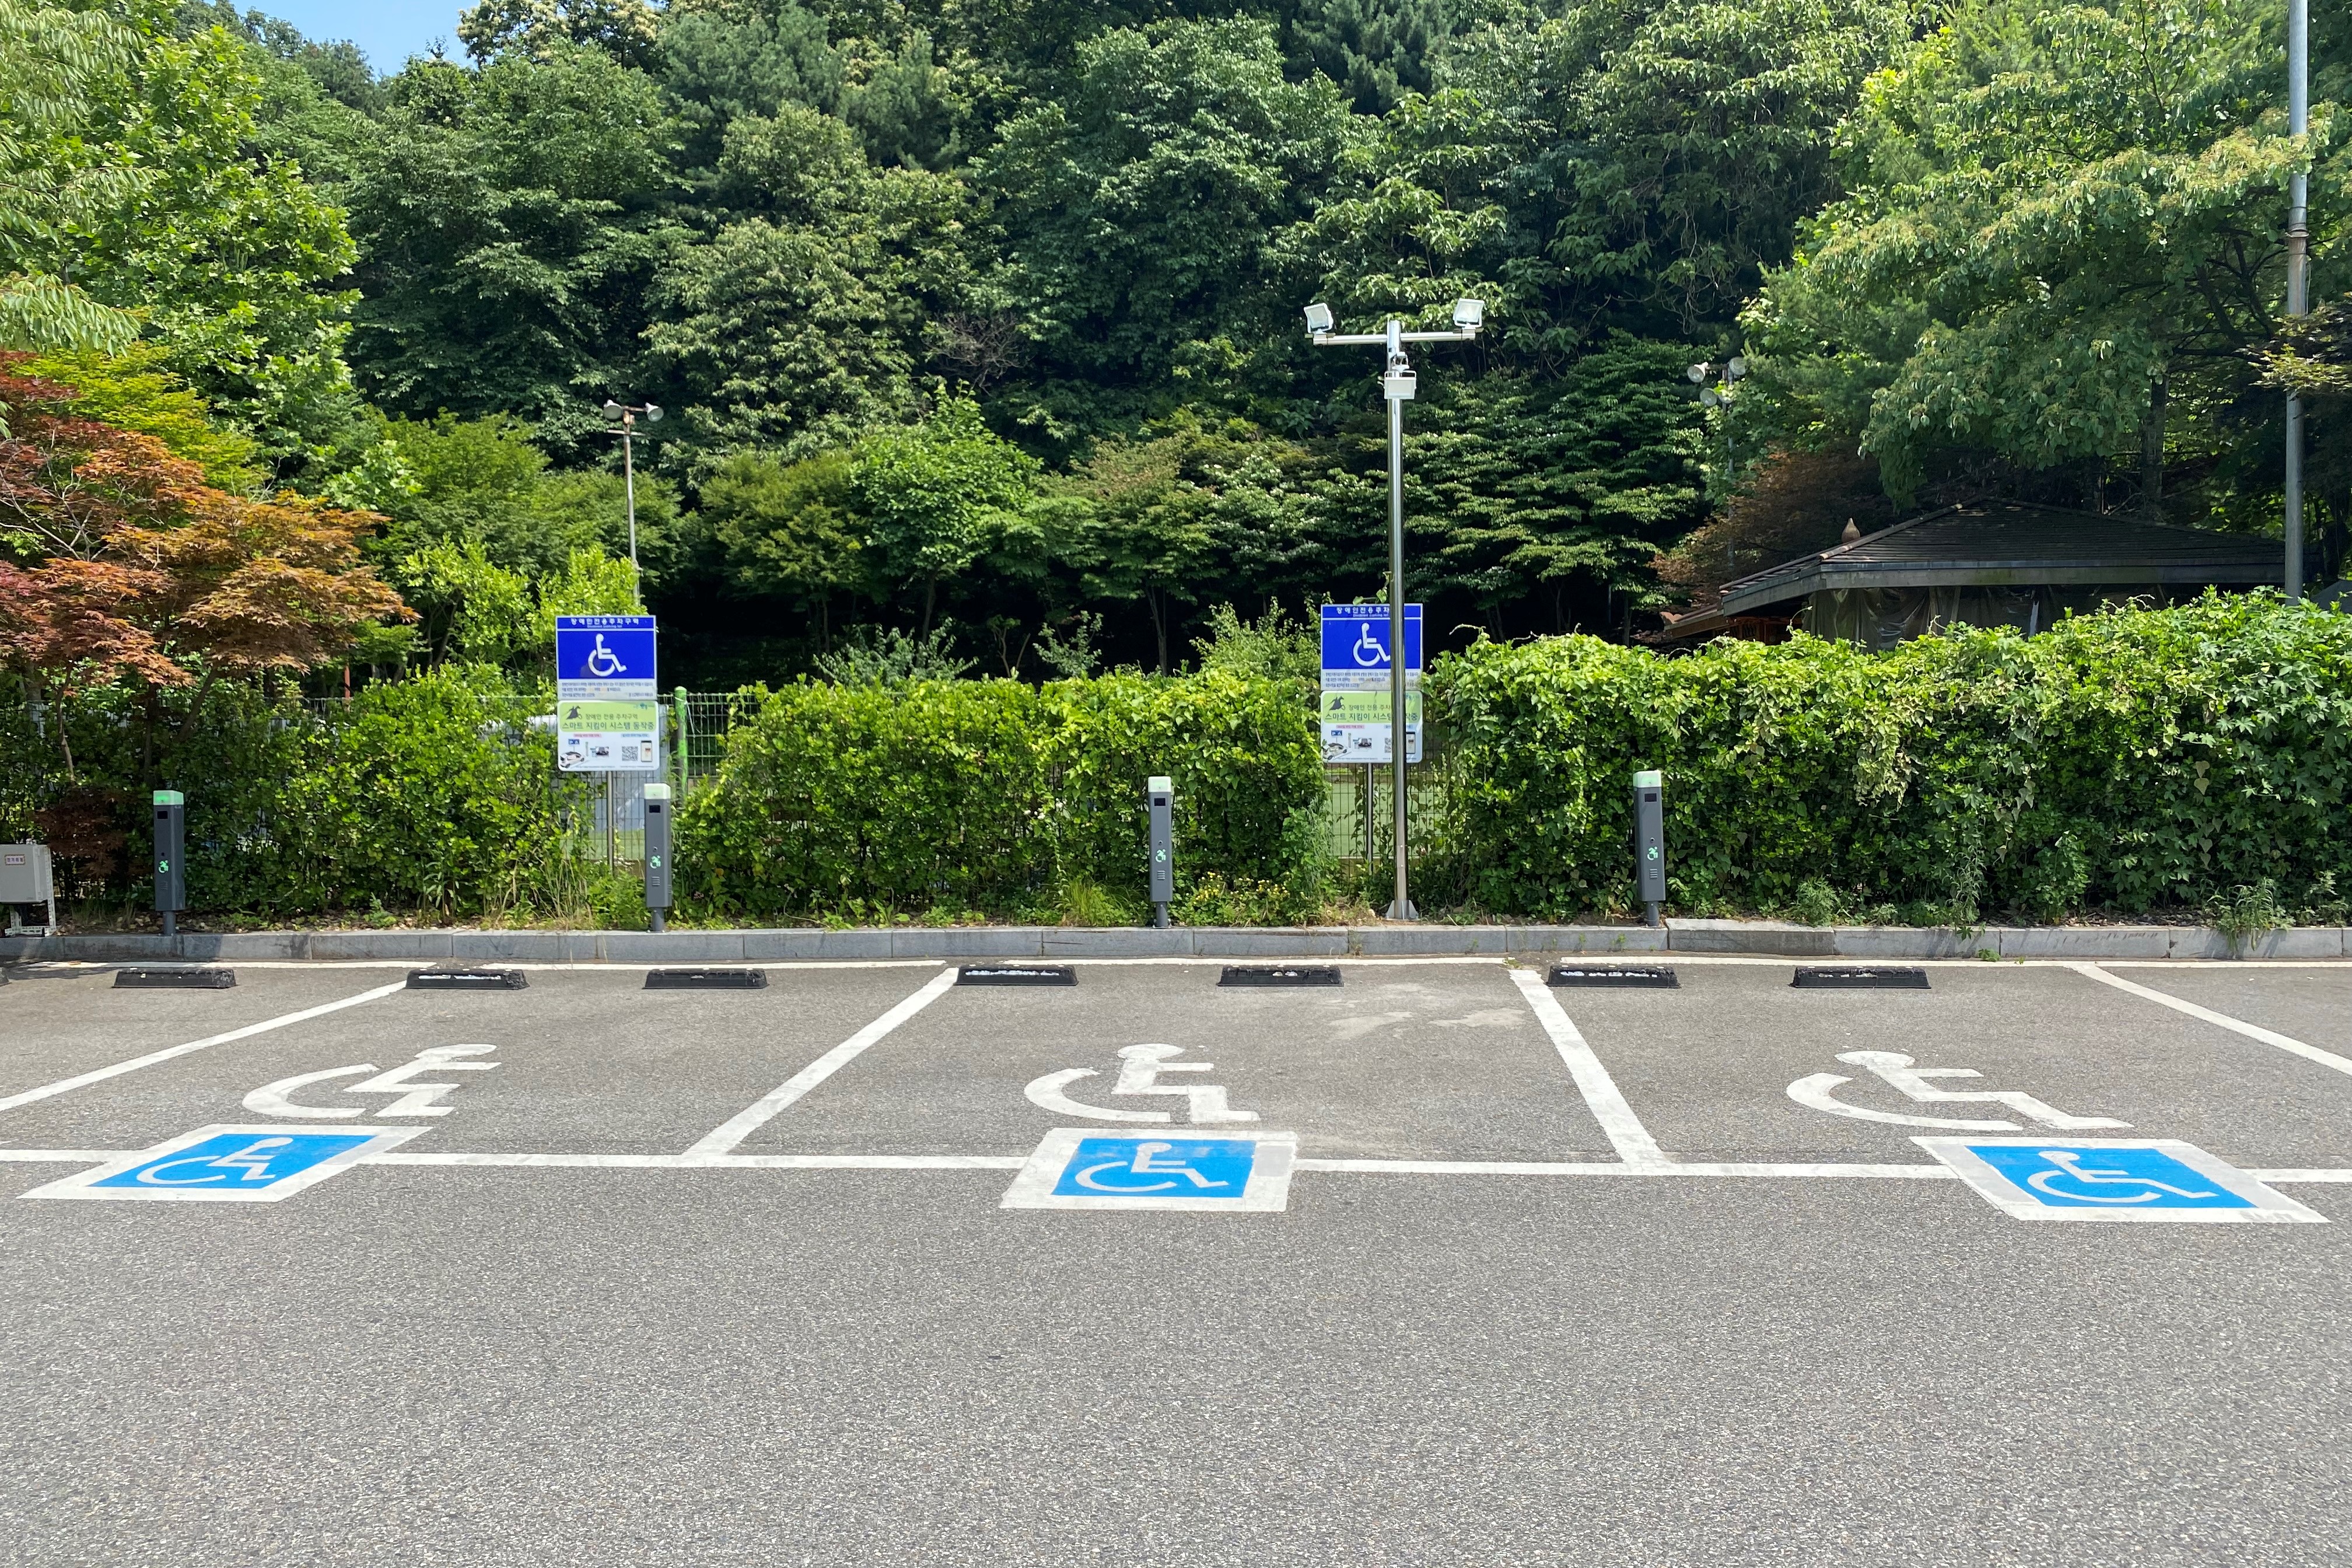 Parking lot0 : Wide and flat parking lots for wheelchair users in Nakseoungdae Park